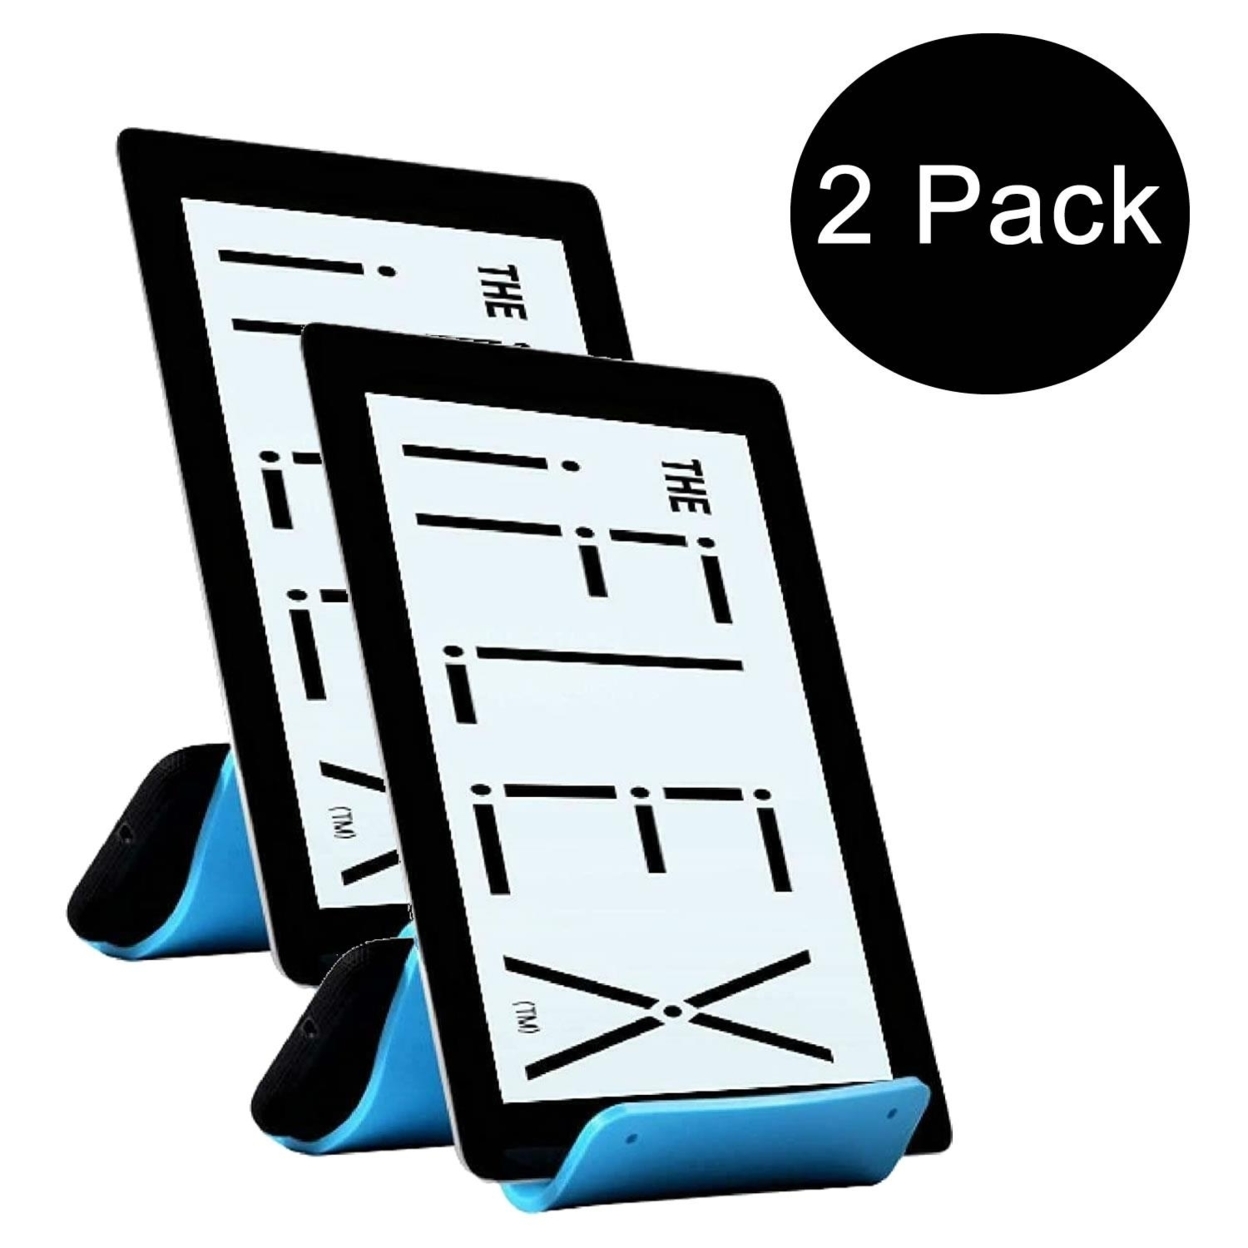 IFLEX Tablet Cell Phone Stand Sky Blue 2-Pack Universal Non-Slip Waterproof Hands-Free